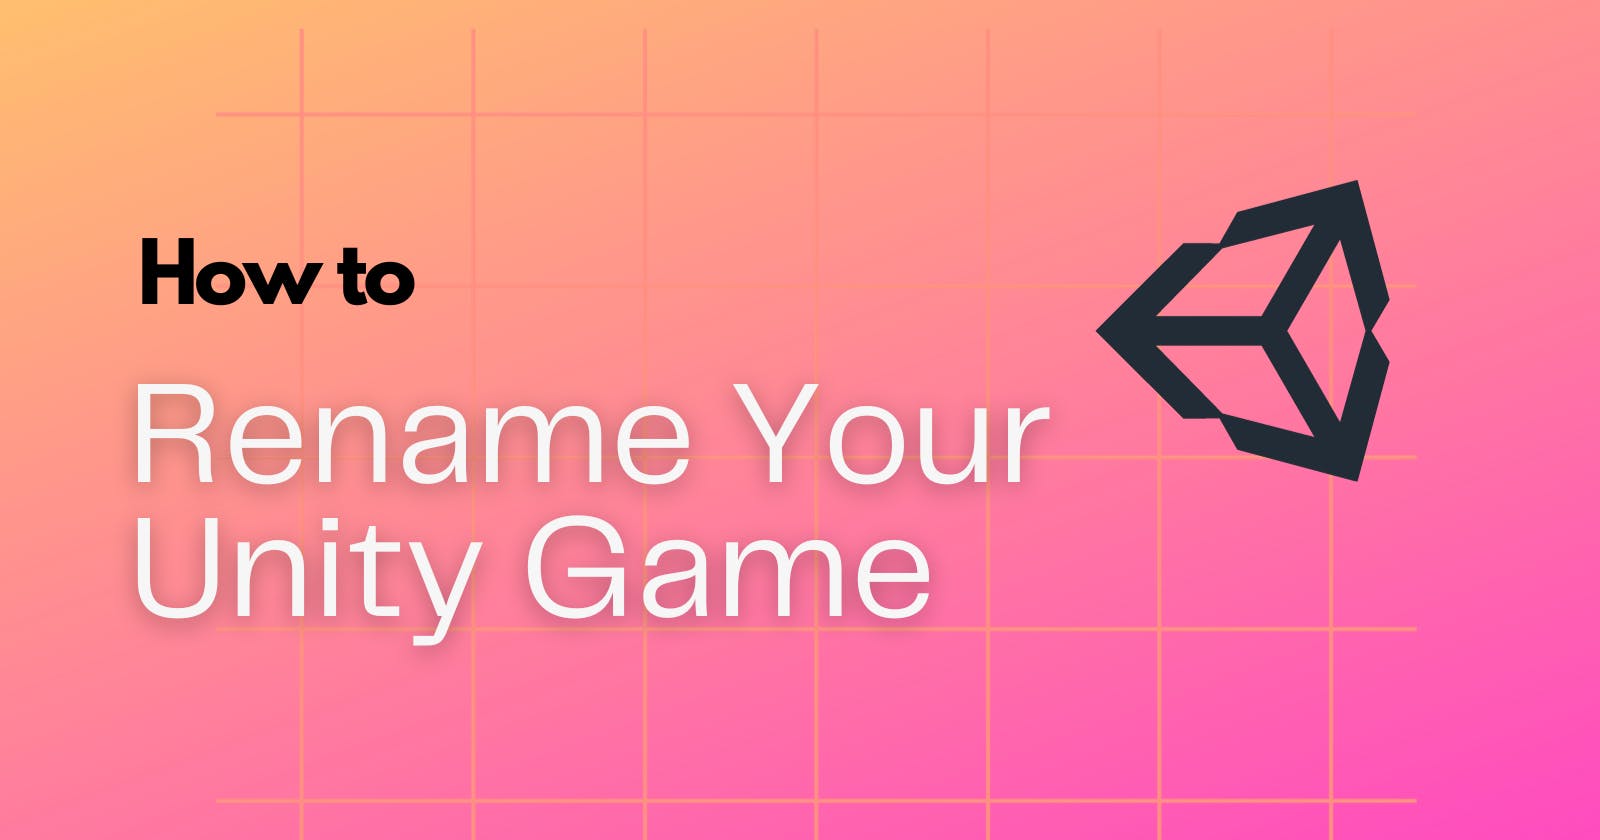 How to Rename Your Unity Game